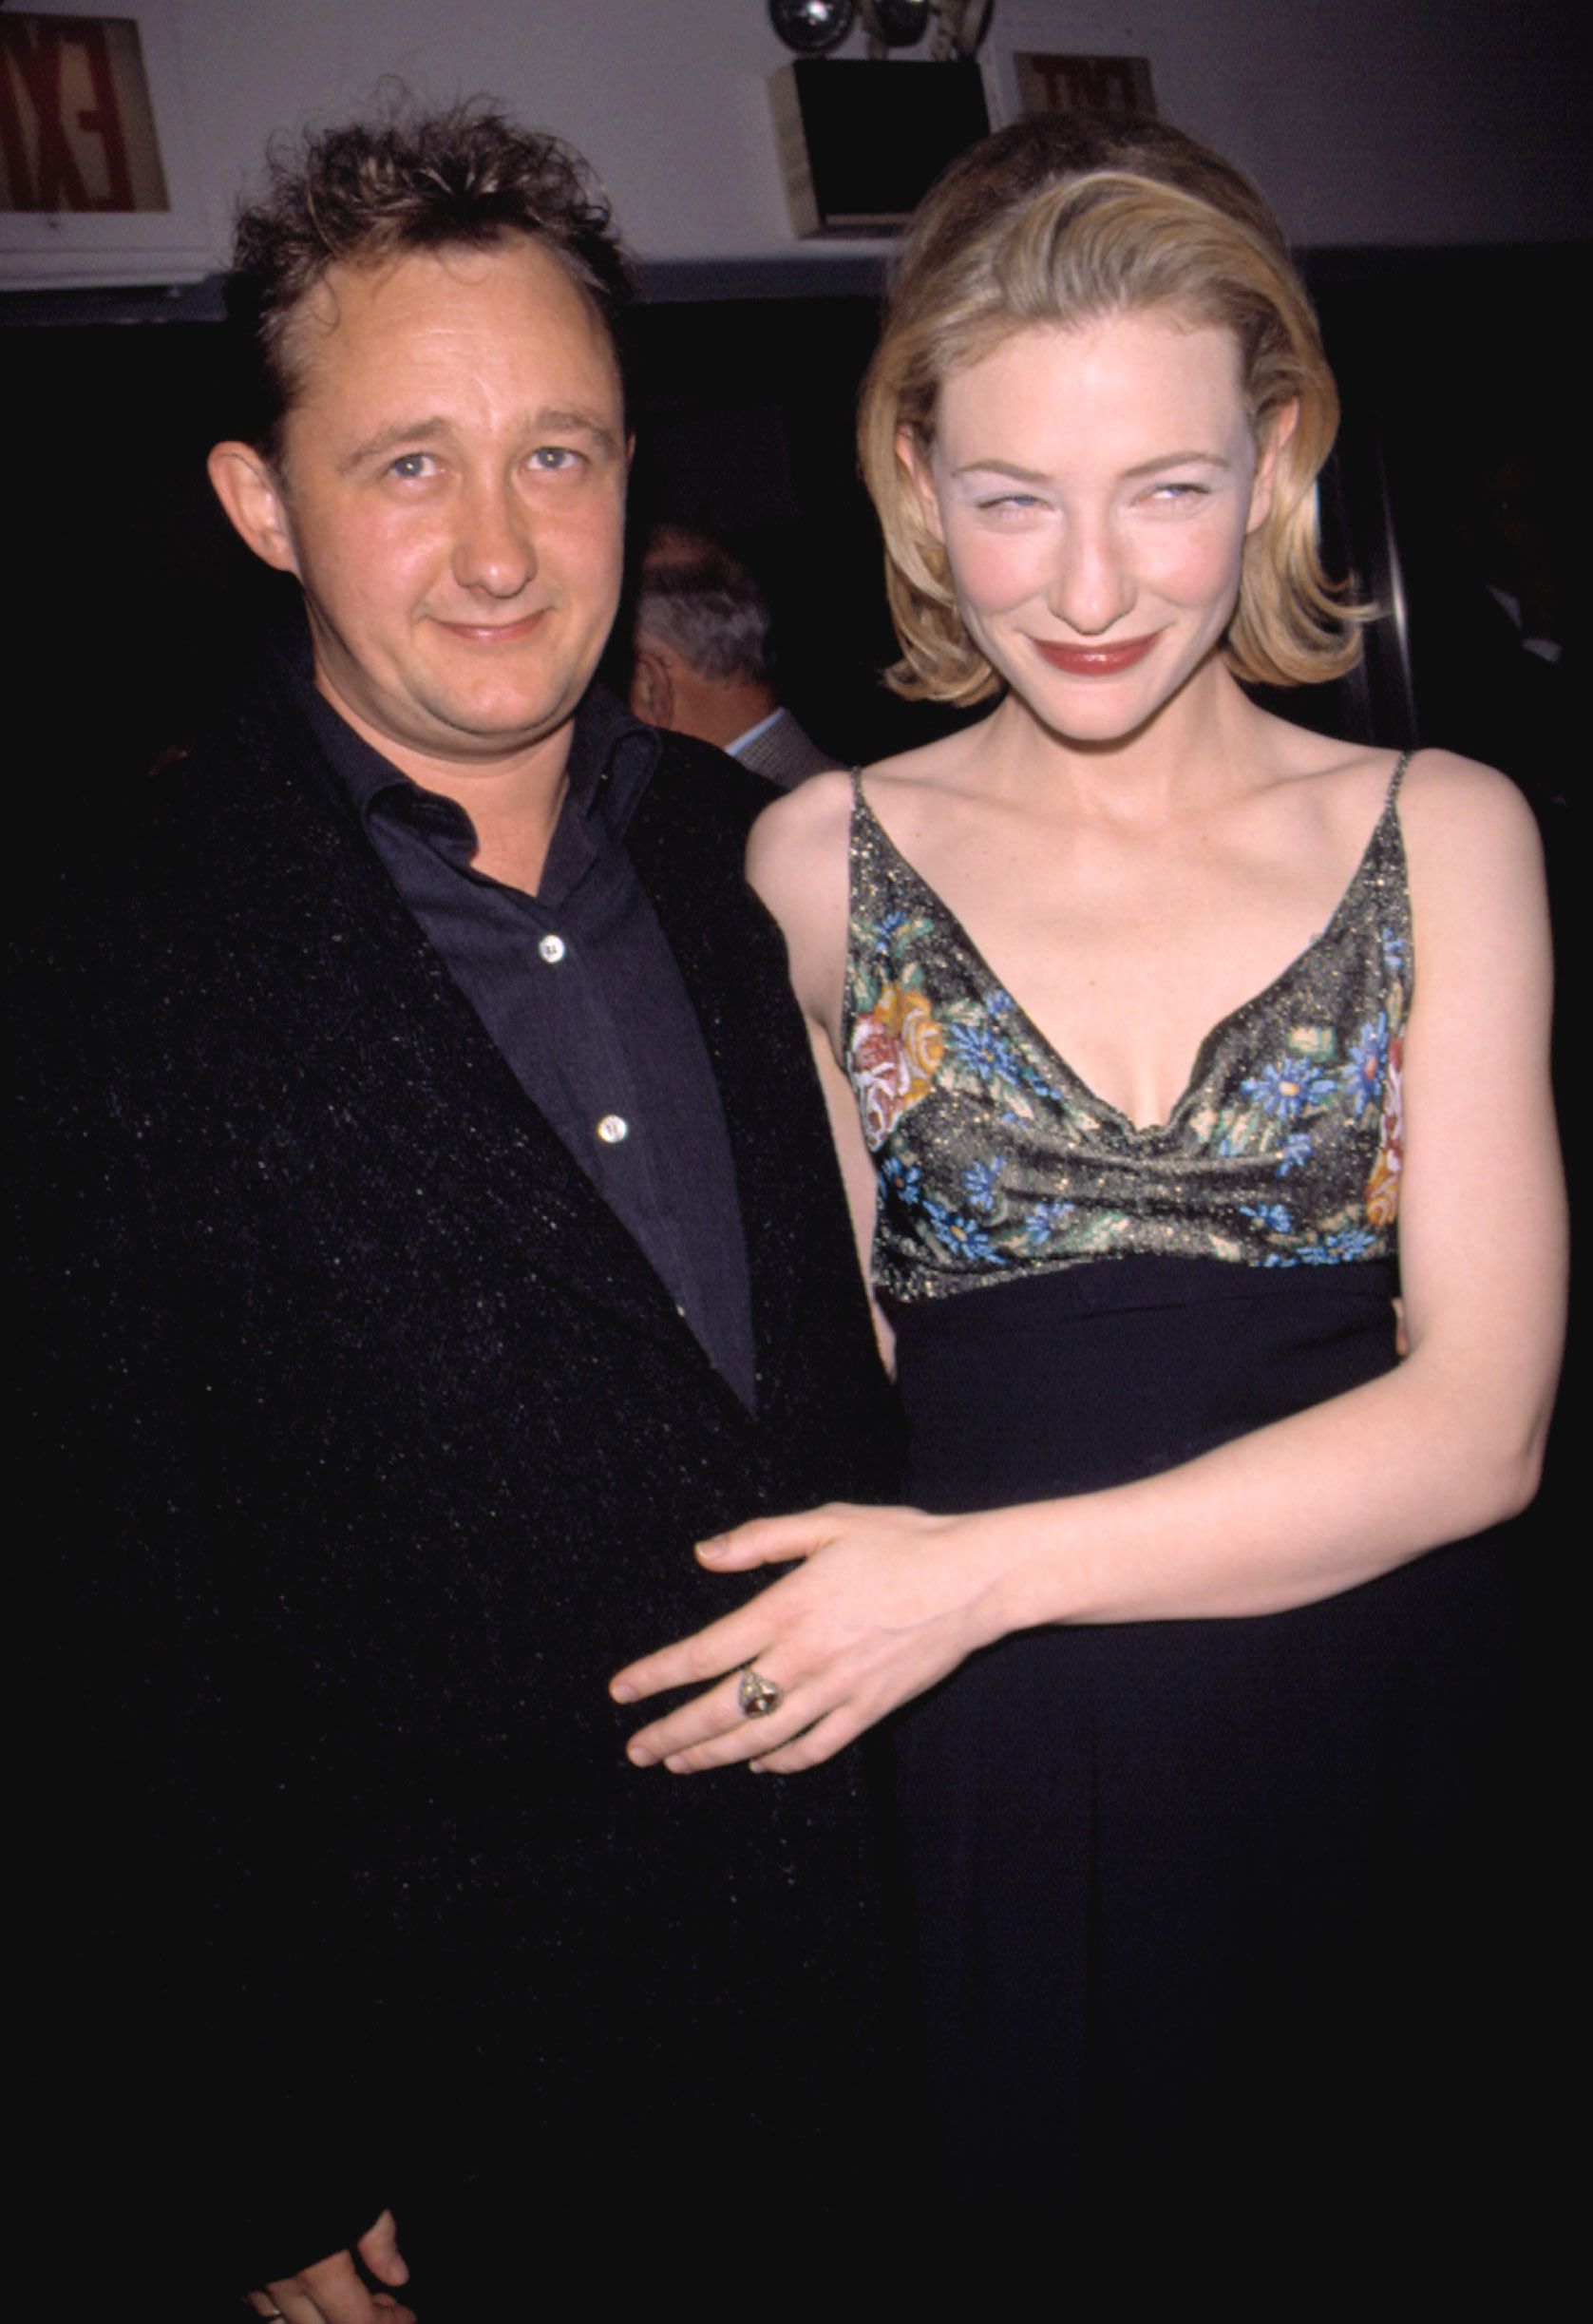 Cate Blanchett with husband Andrew Upton at the premiere of "Elizabeth" in 1998 | Source: Shutterstock